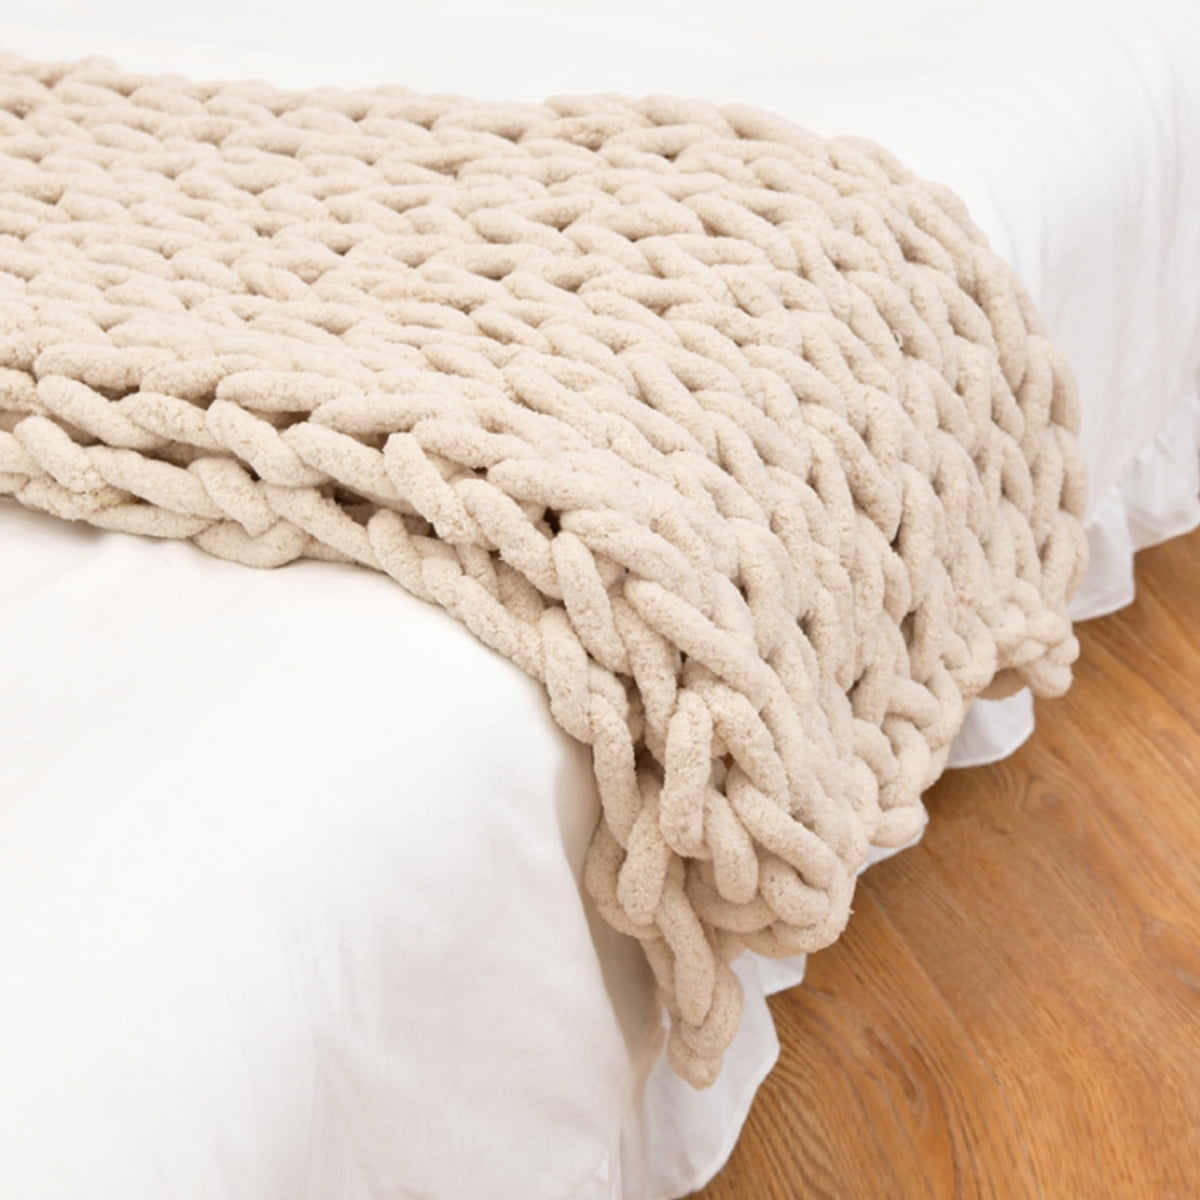 Washable Hand-woven Skin-friendly Blanket Soft Bulky Thick Knitted Bed ...